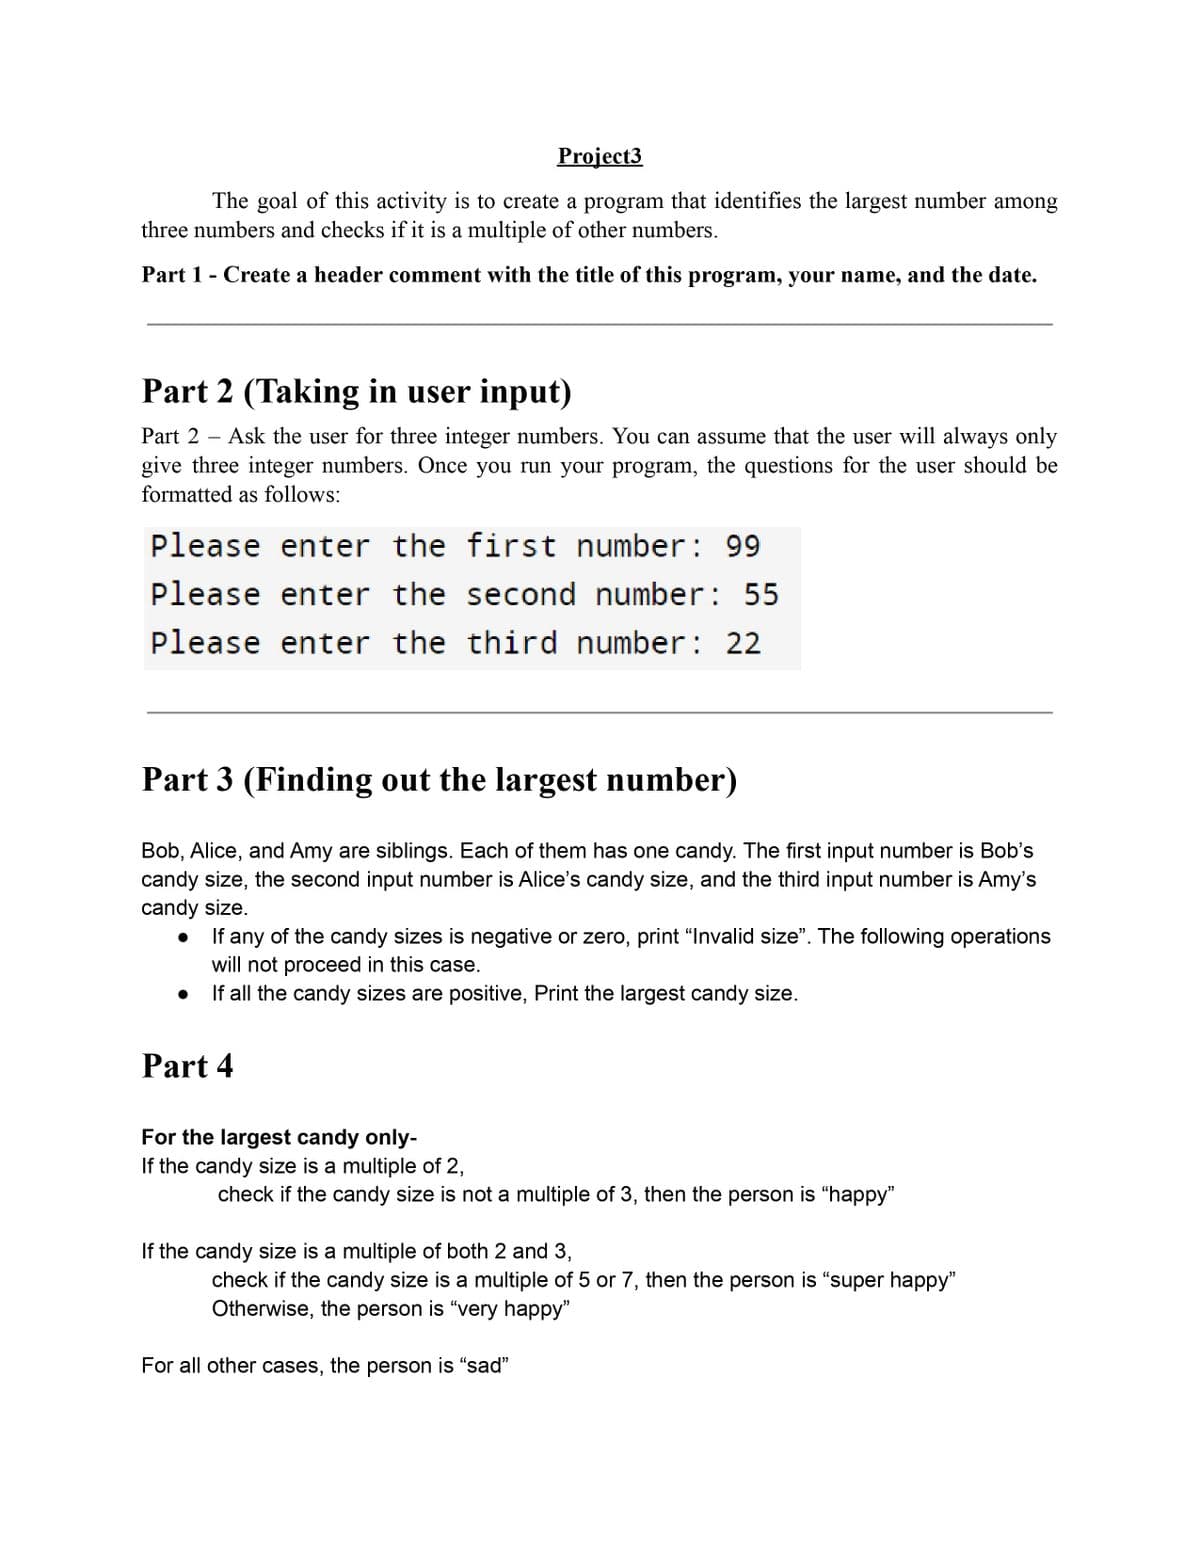 Project3
The goal of this activity is to create a program that identifies the largest number among
three numbers and checks if it is a multiple of other numbers.
Part 1 - Create a header comment with the title of this program, your name, and the date.
Part 2 (Taking in user input)
Part 2 - Ask the user for three integer numbers. You can assume that the user will always only
give three integer numbers. Once you run your program, the questions for the user should be
formatted as follows:
Please enter the first number: 99
Please enter the second number: 55
Please enter the third number: 22
Part 3 (Finding out the largest number)
Bob, Alice, and Amy are siblings. Each of them has one candy. The first input number is Bob's
candy size, the second input number is Alice's candy size, and the third input number is Amy's
candy size.
If any of the candy sizes is negative or zero, print "Invalid size". The following operations
will not proceed in this case.
If all the candy sizes are positive, Print the largest candy size.
Part 4
For the largest candy only-
If the candy size is a multiple of 2,
check if the candy size is not a multiple of 3, then the person is "happy"
If the candy size is a multiple of both 2 and 3,
check if the candy size is a multiple of 5 or 7, then the person is "super happy"
Otherwise, the person is "very happy"
For all other cases, the person is "sad"